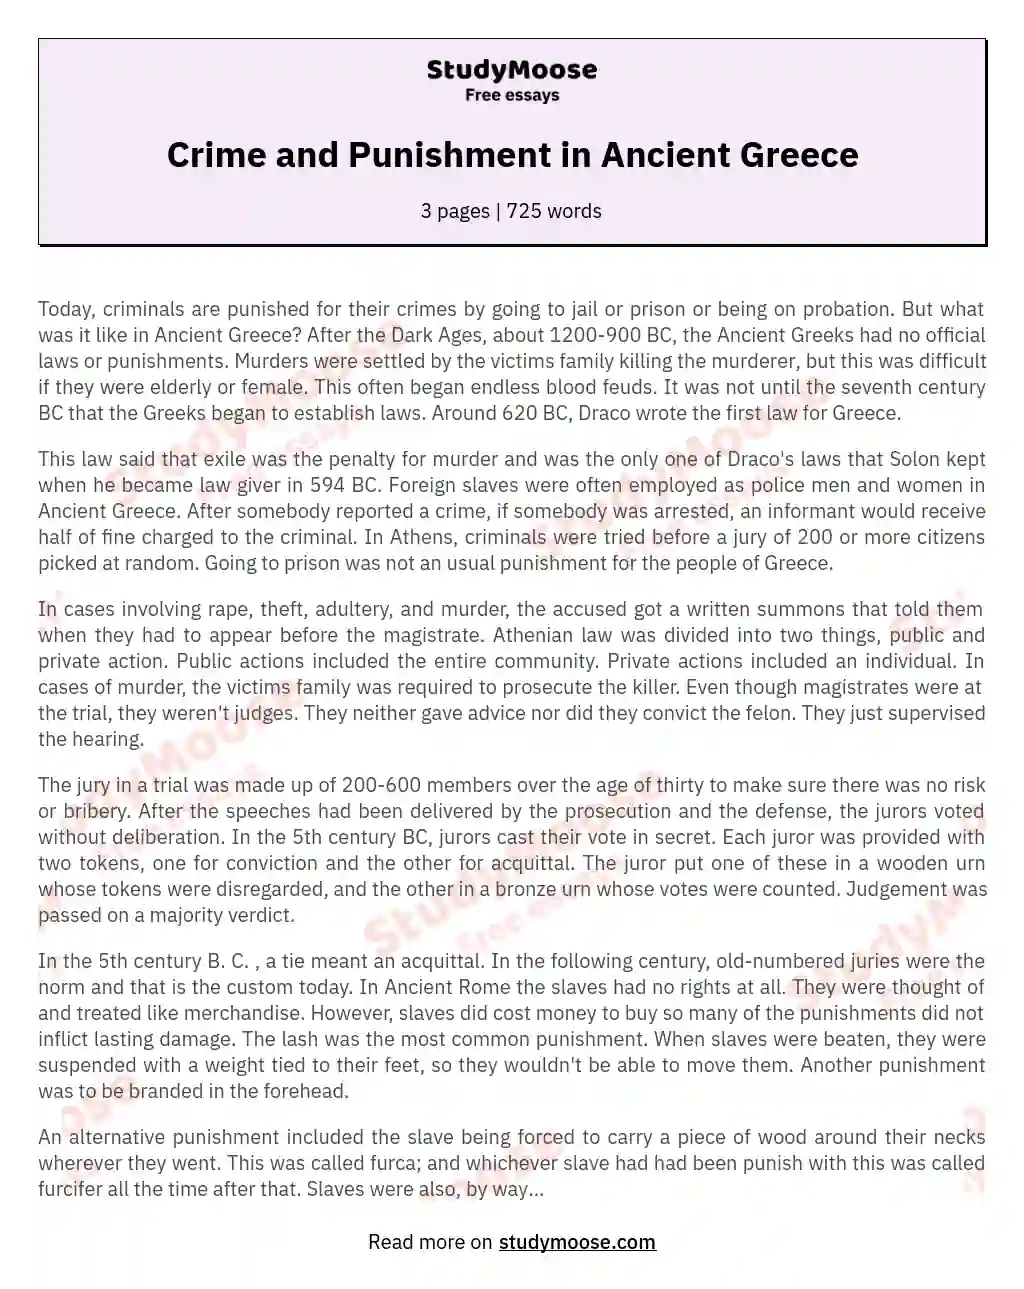 Crime and Punishment in Ancient Greece essay